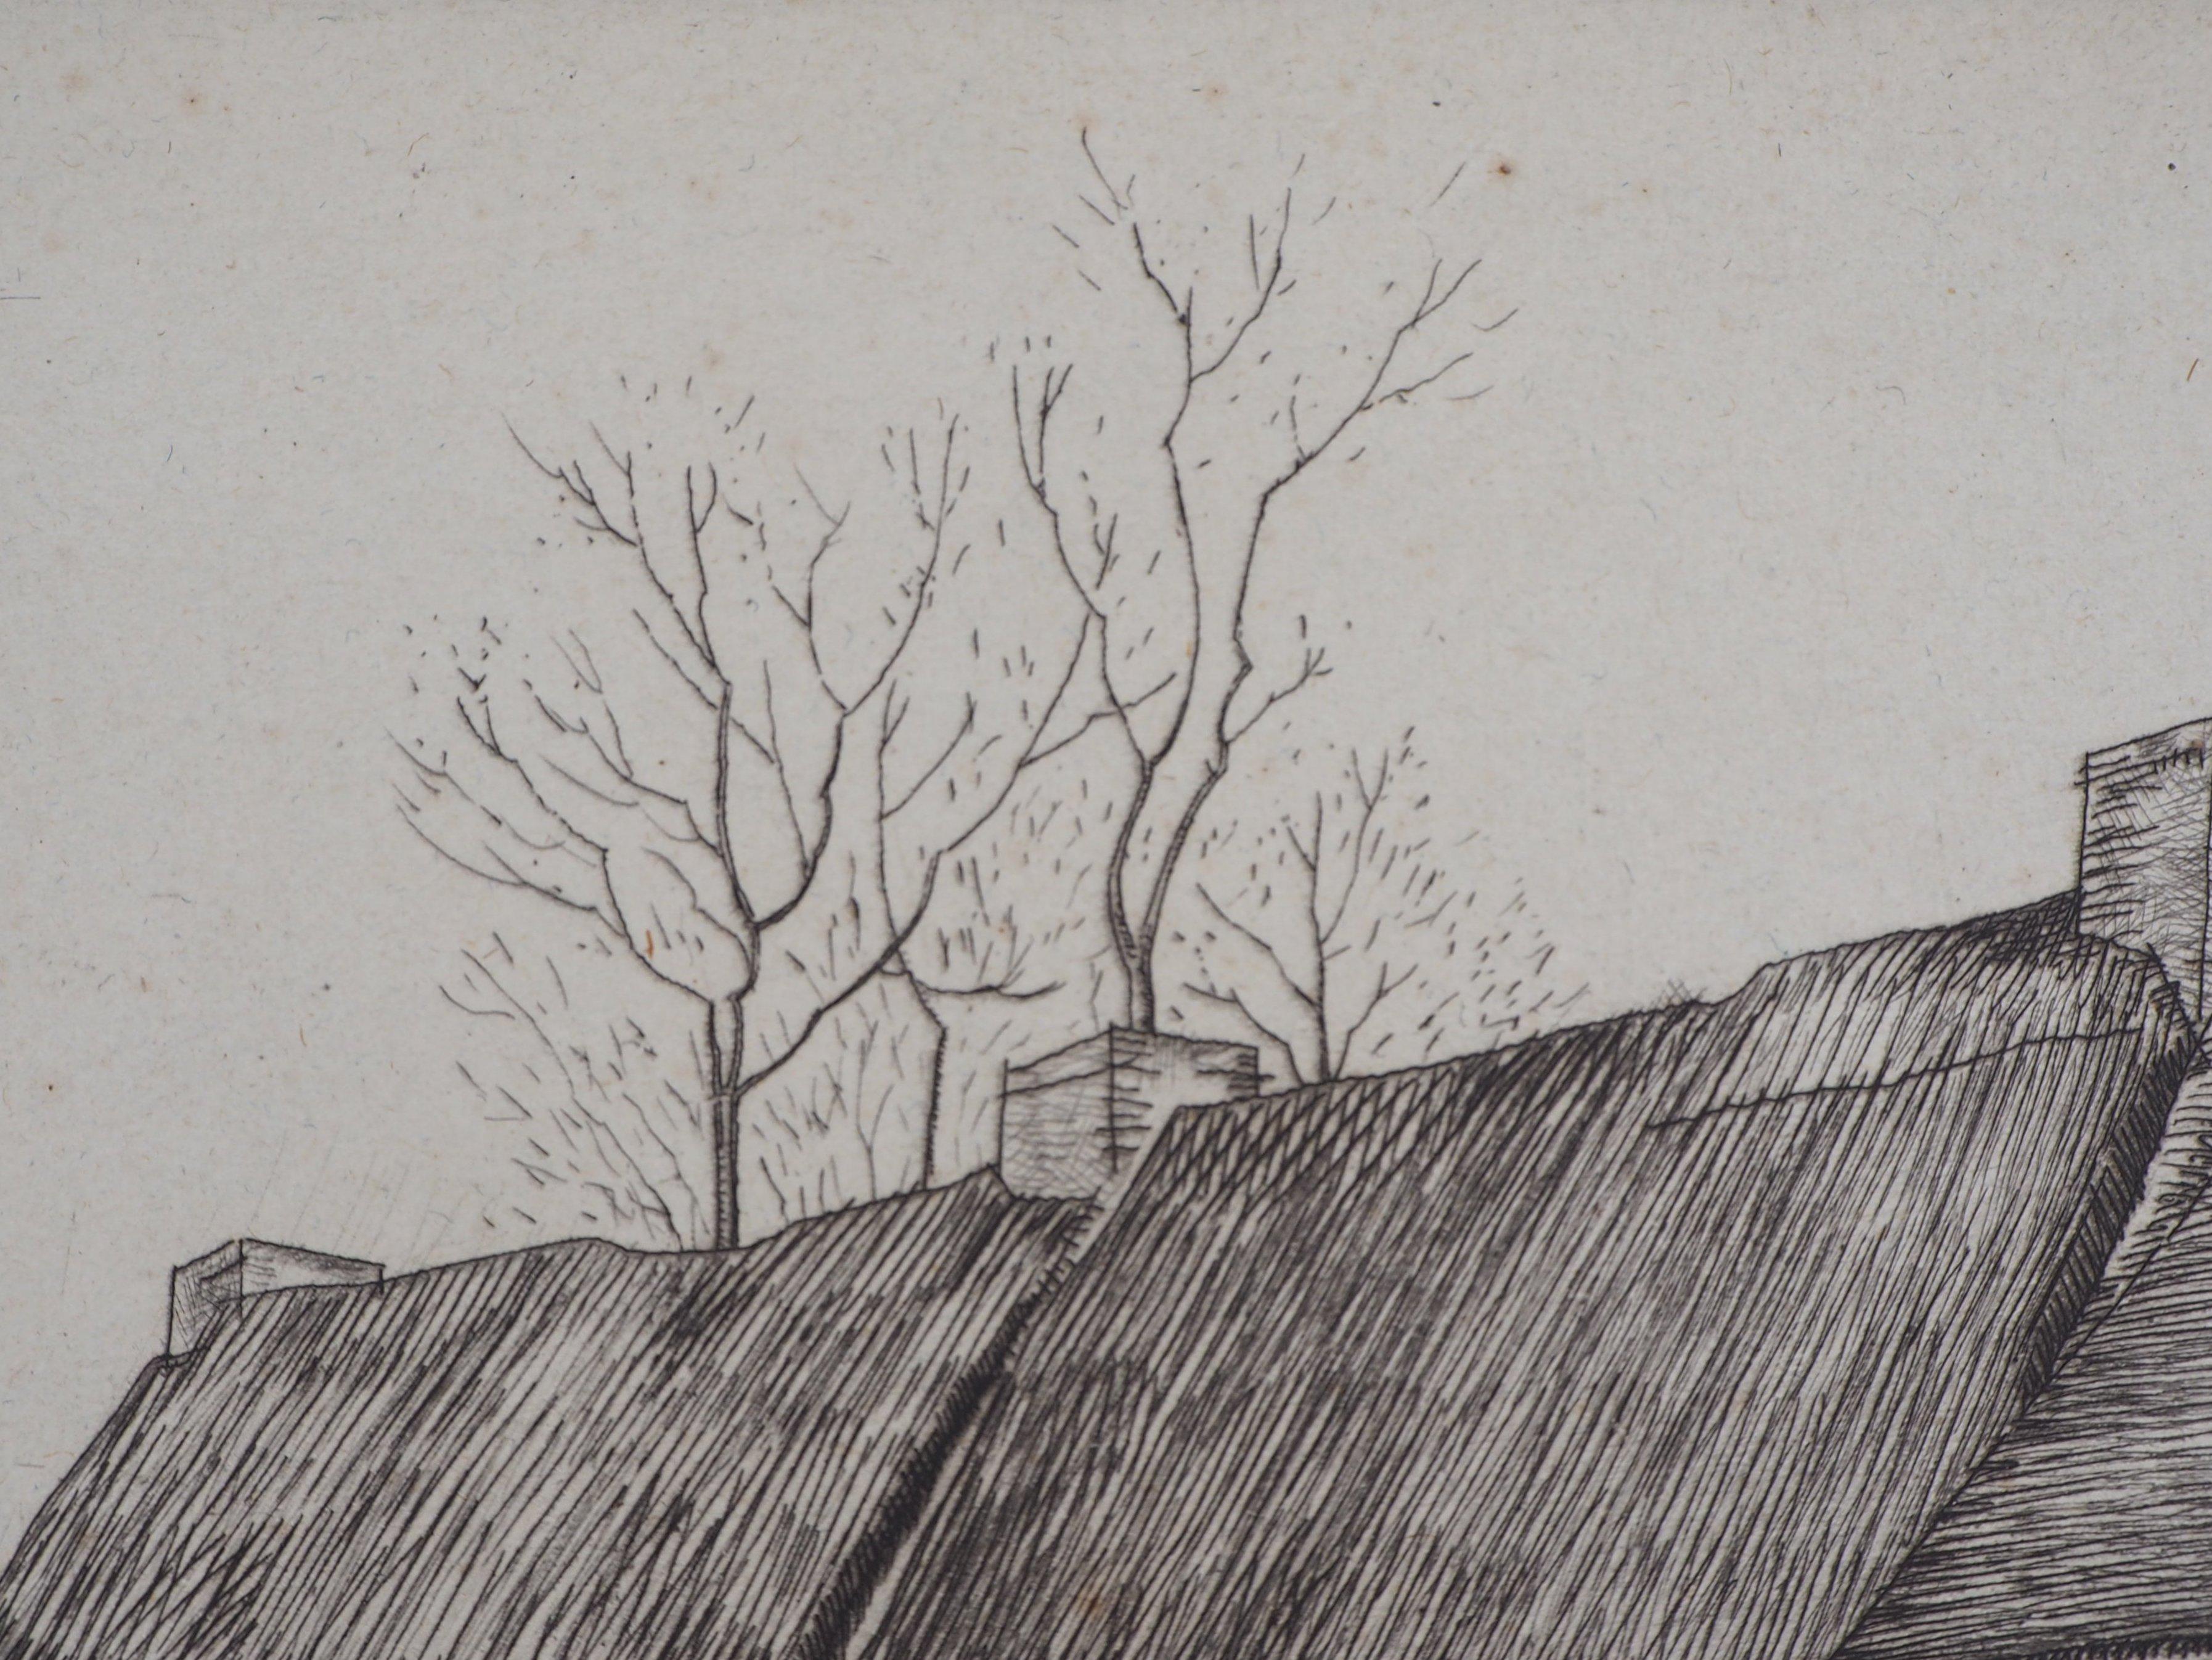 Houses in Brittany - Original Etching, Handsigned 2